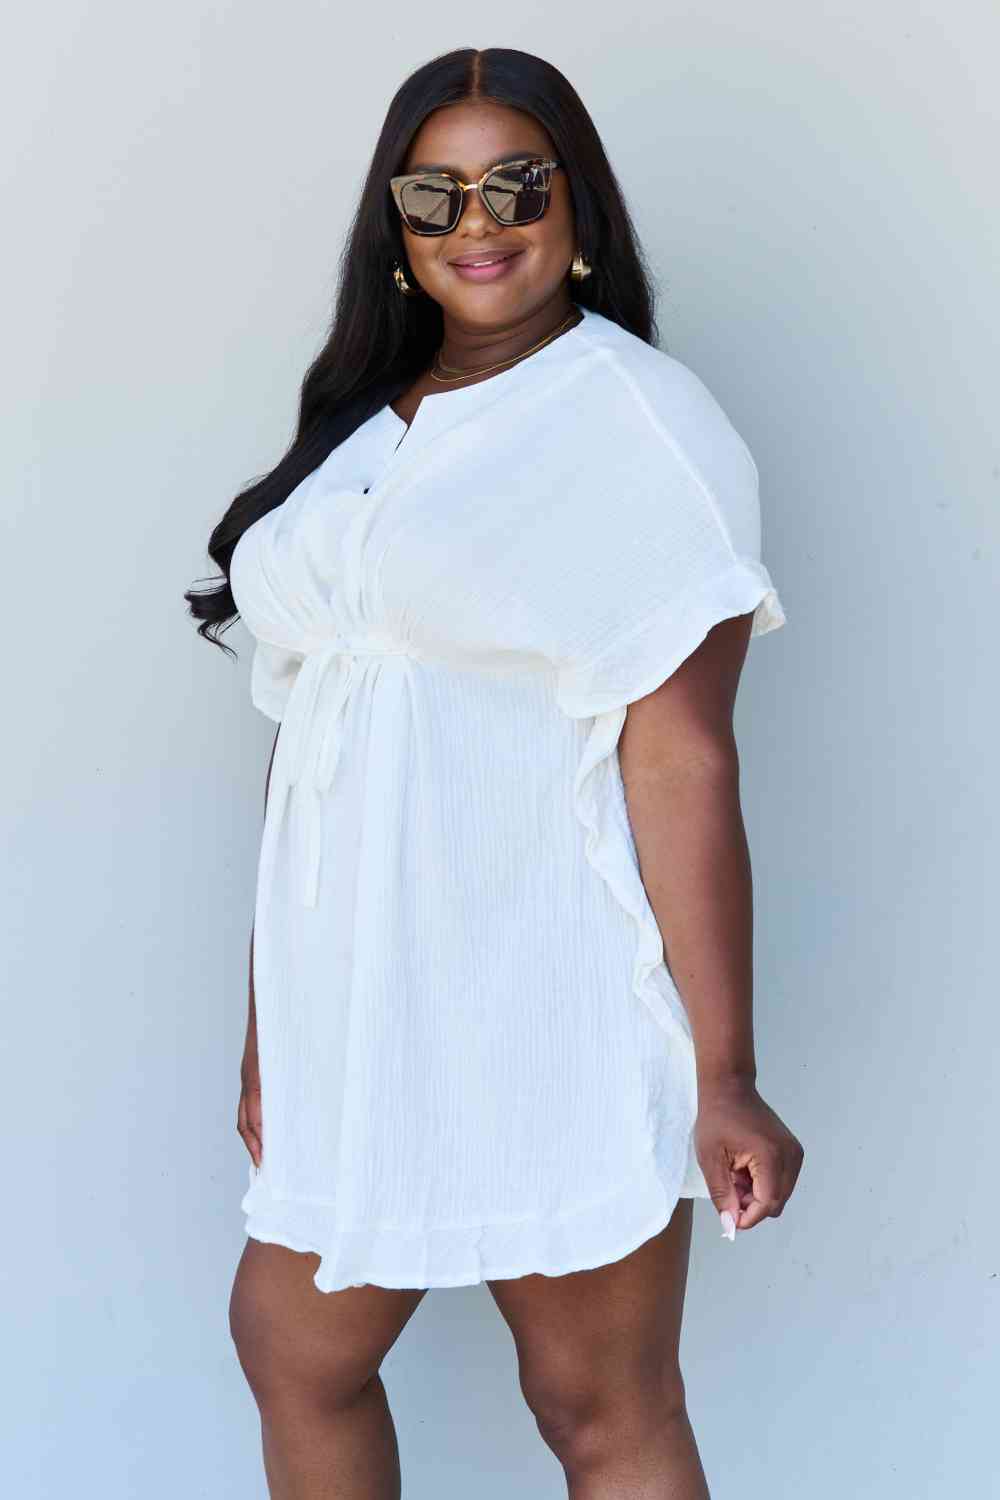 Ninexis Out Of Time Full Size Ruffle Hem Dress with Drawstring Waistband in White No 7